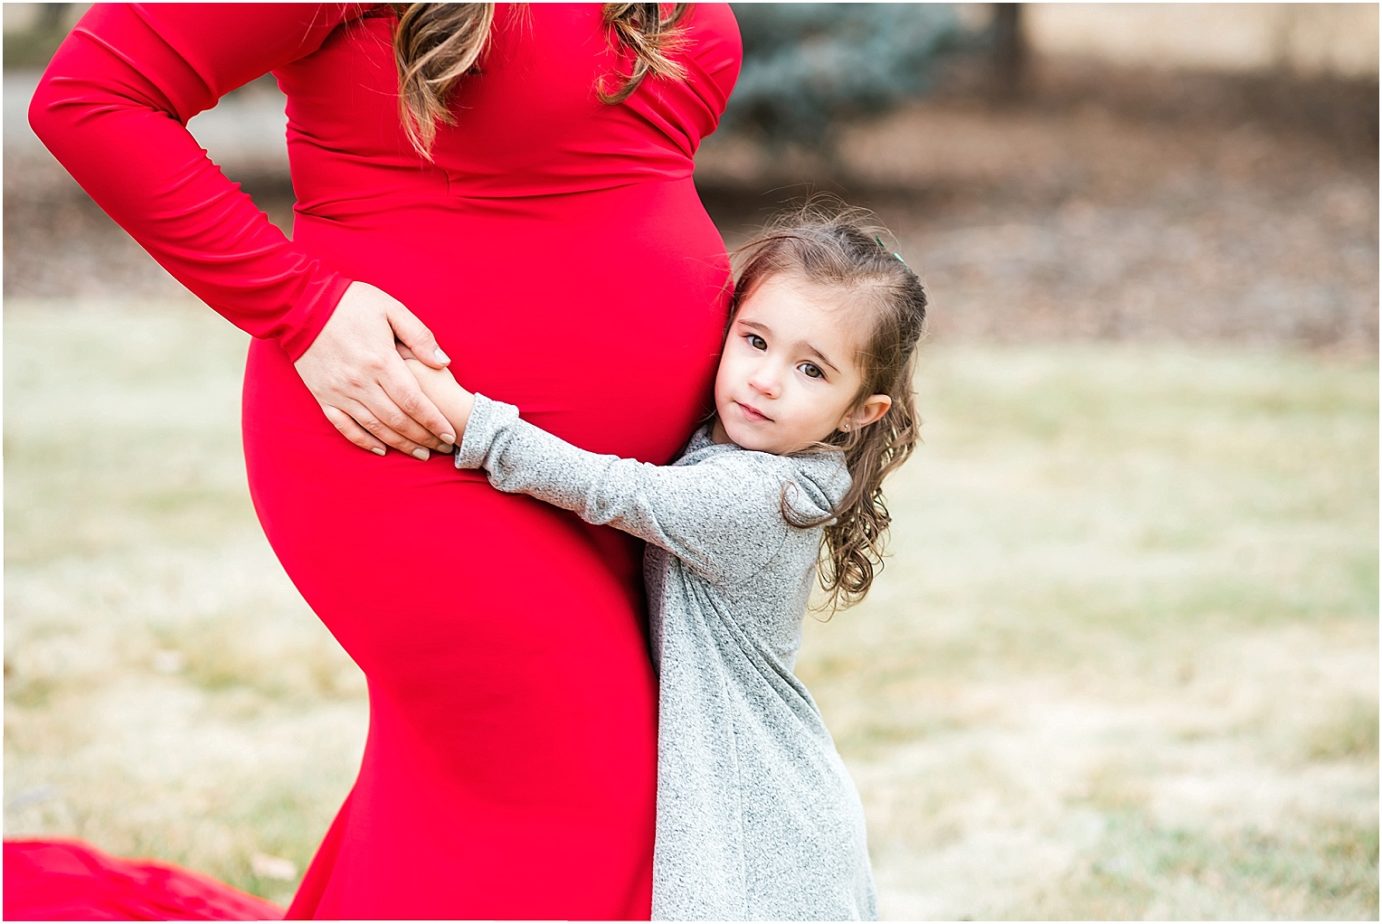 Maries maternity session prenant woman in long red dress with first child